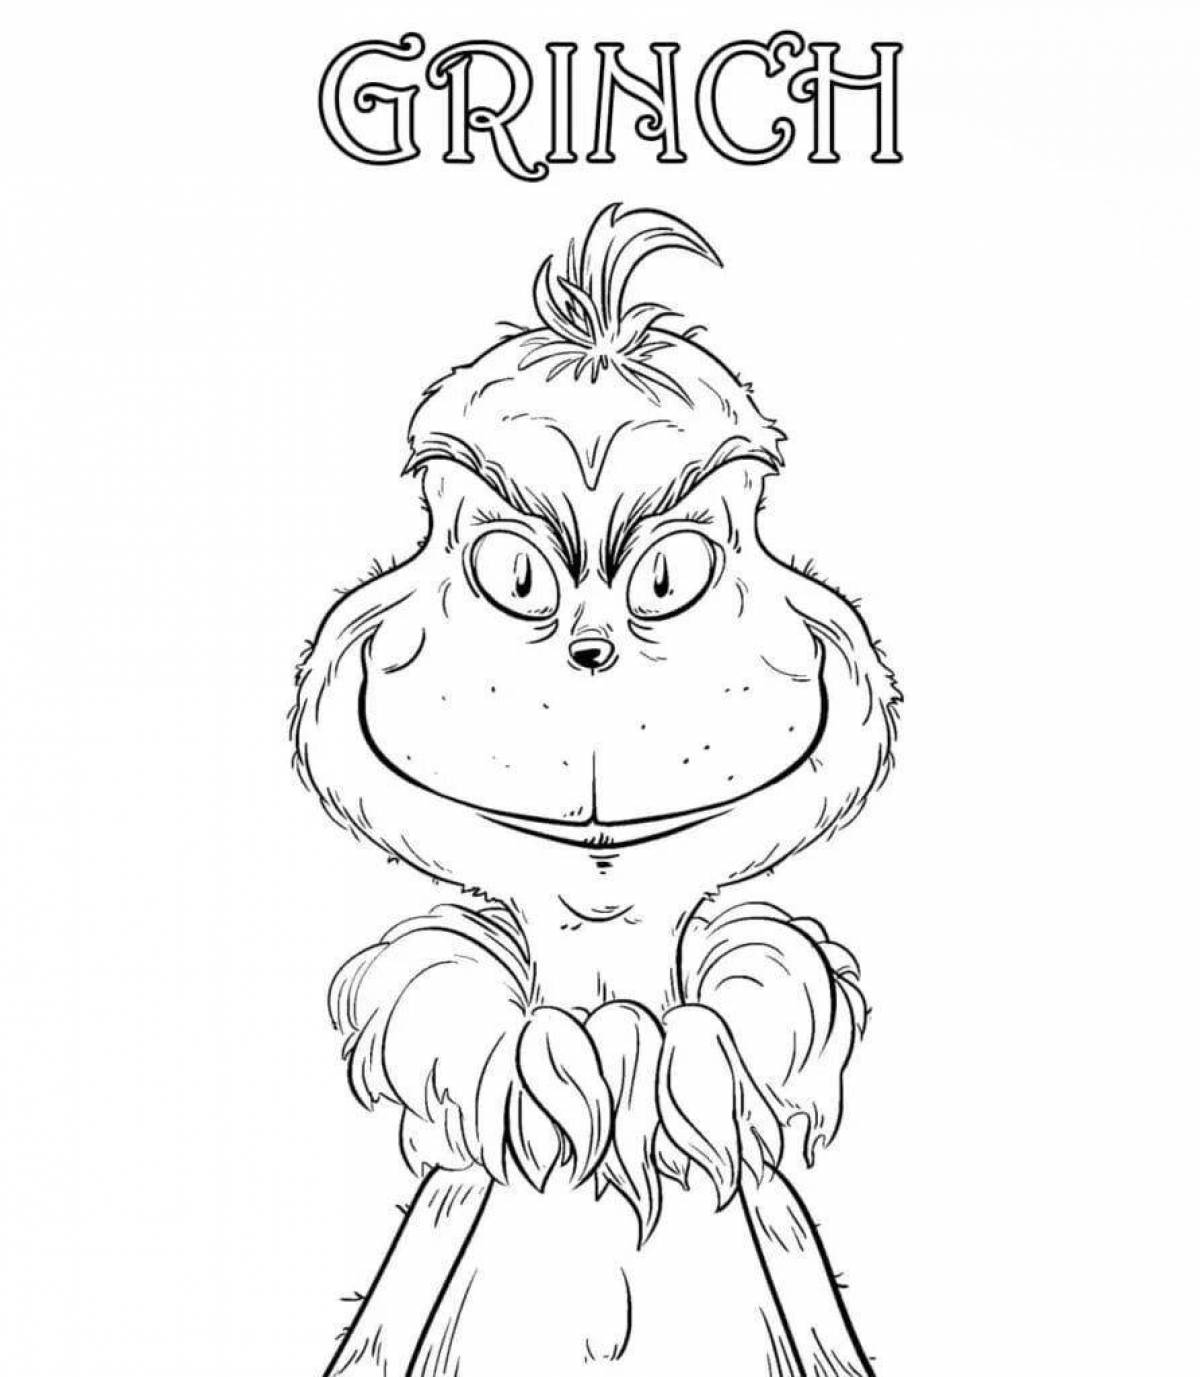 Great grinch stole a Christmas coloring book